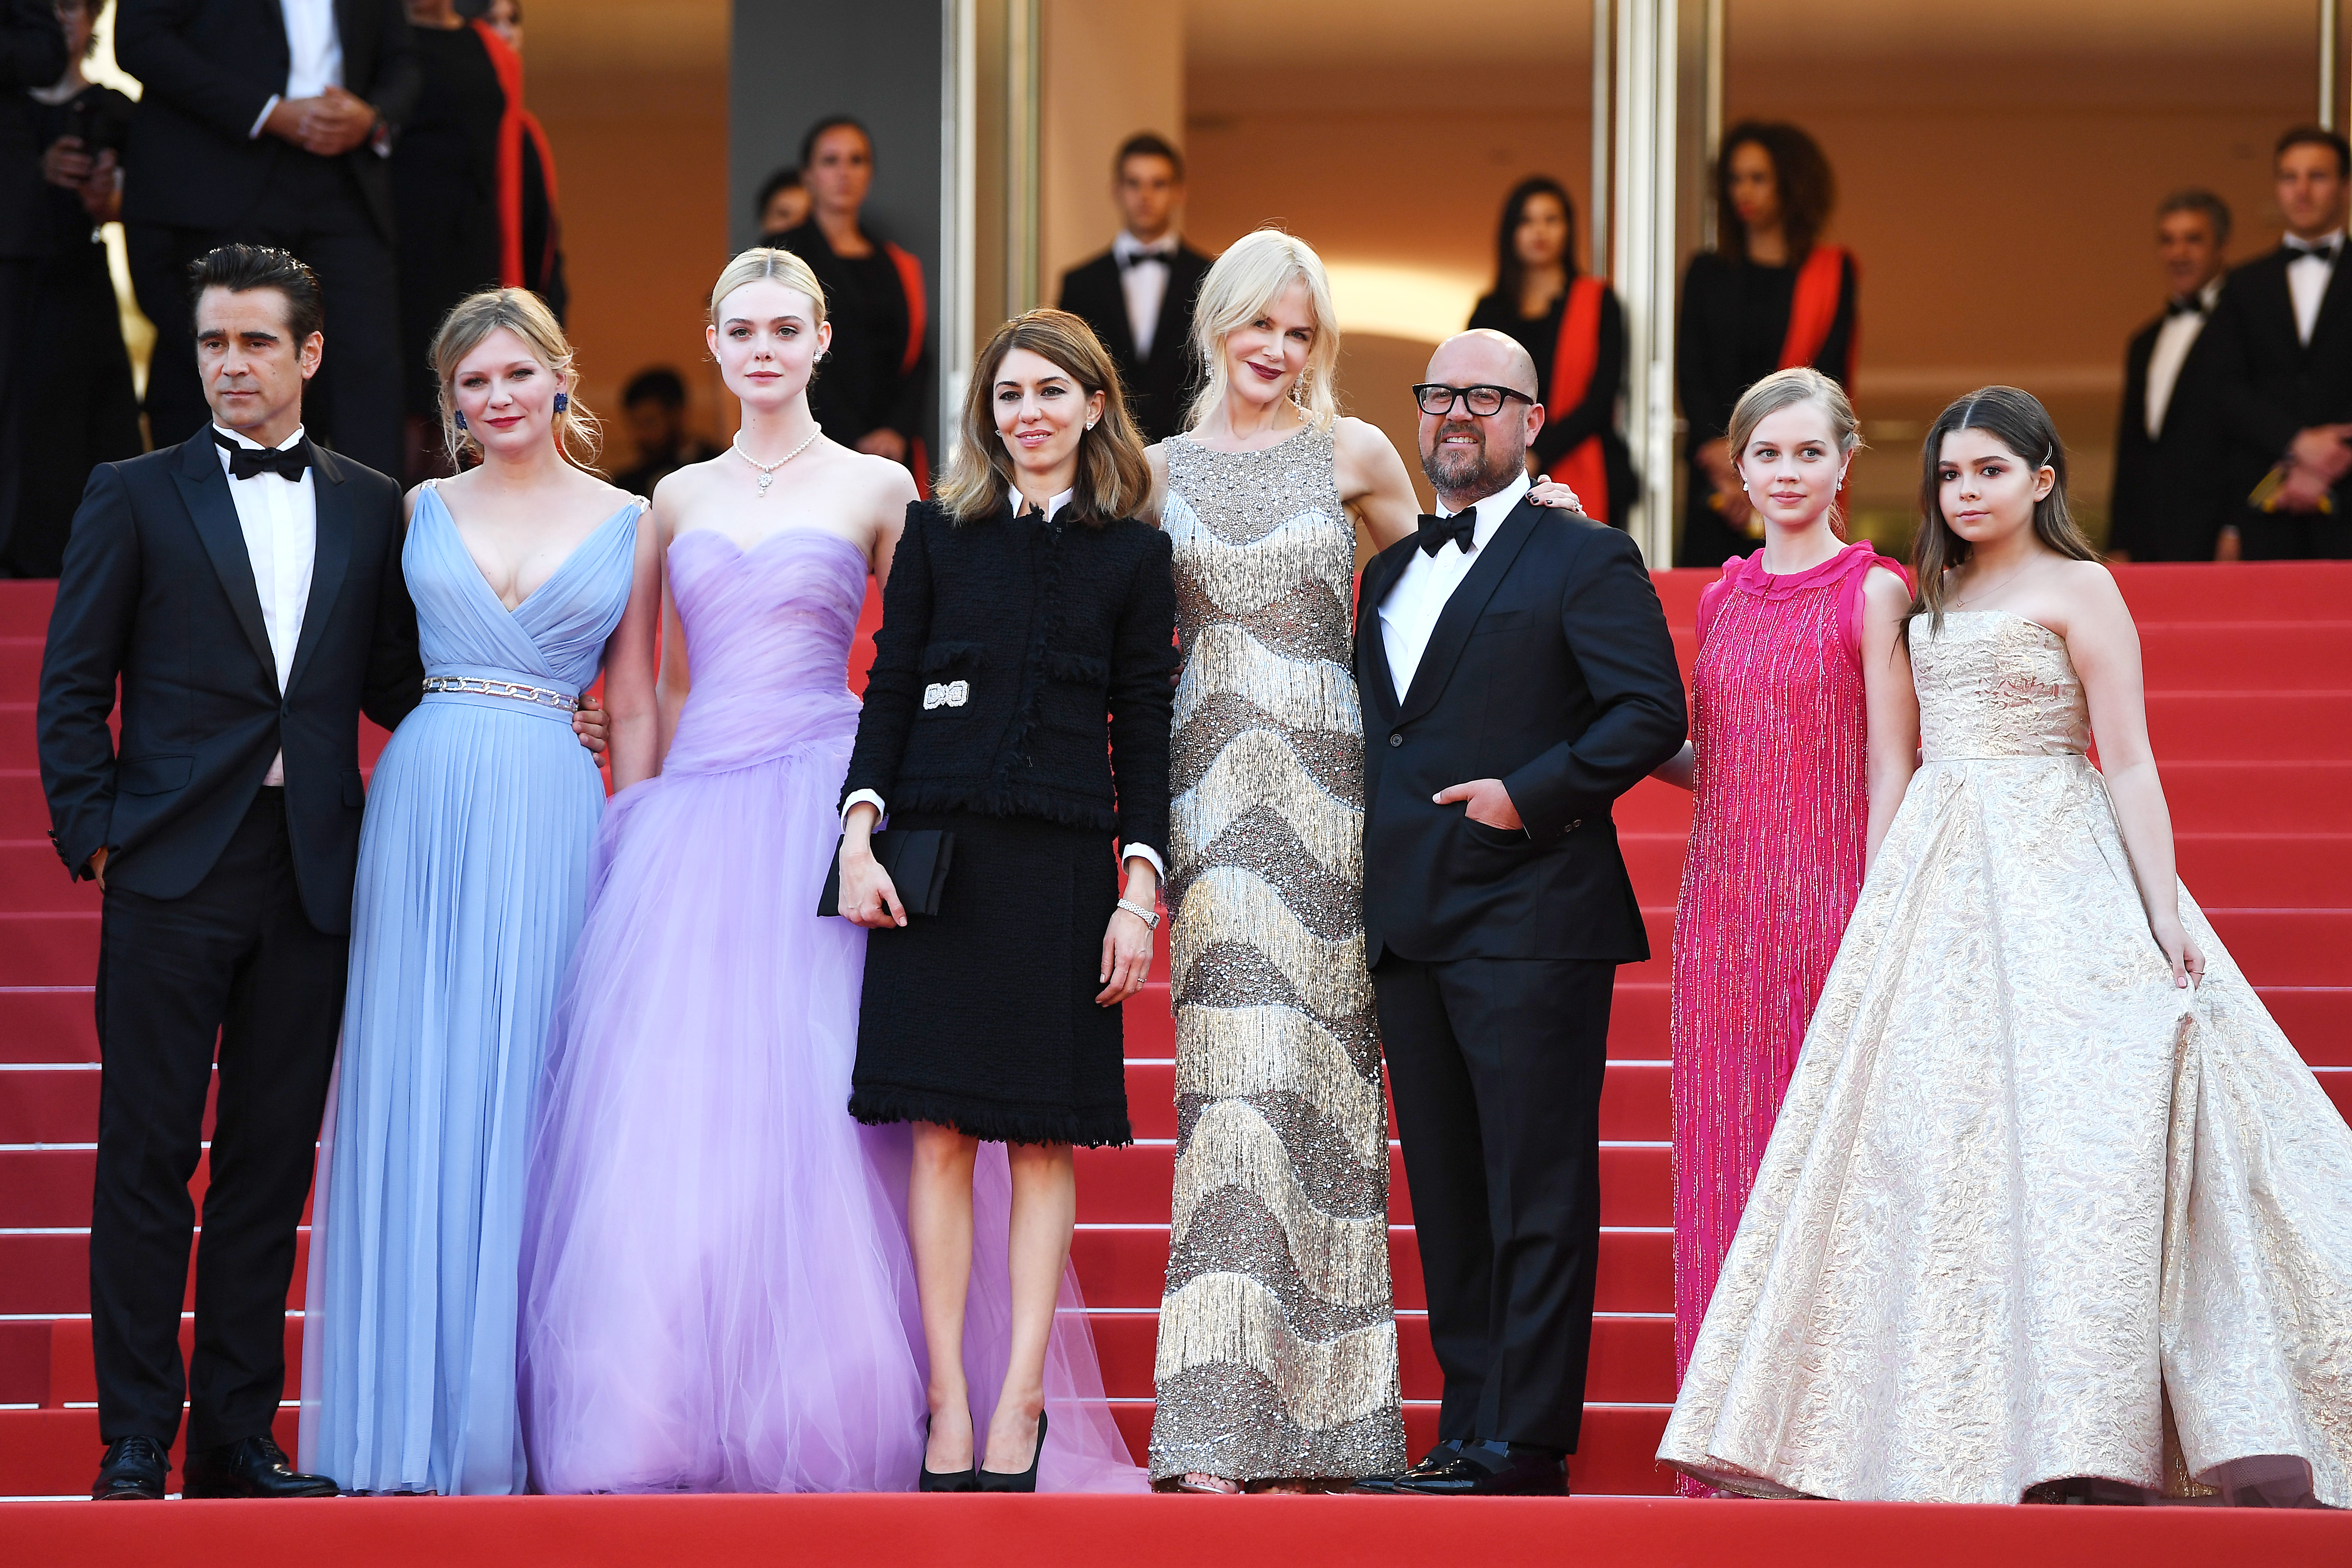 "The Beguiled" Red Carpet Arrivals - The 70th Annual Cannes Film Festival